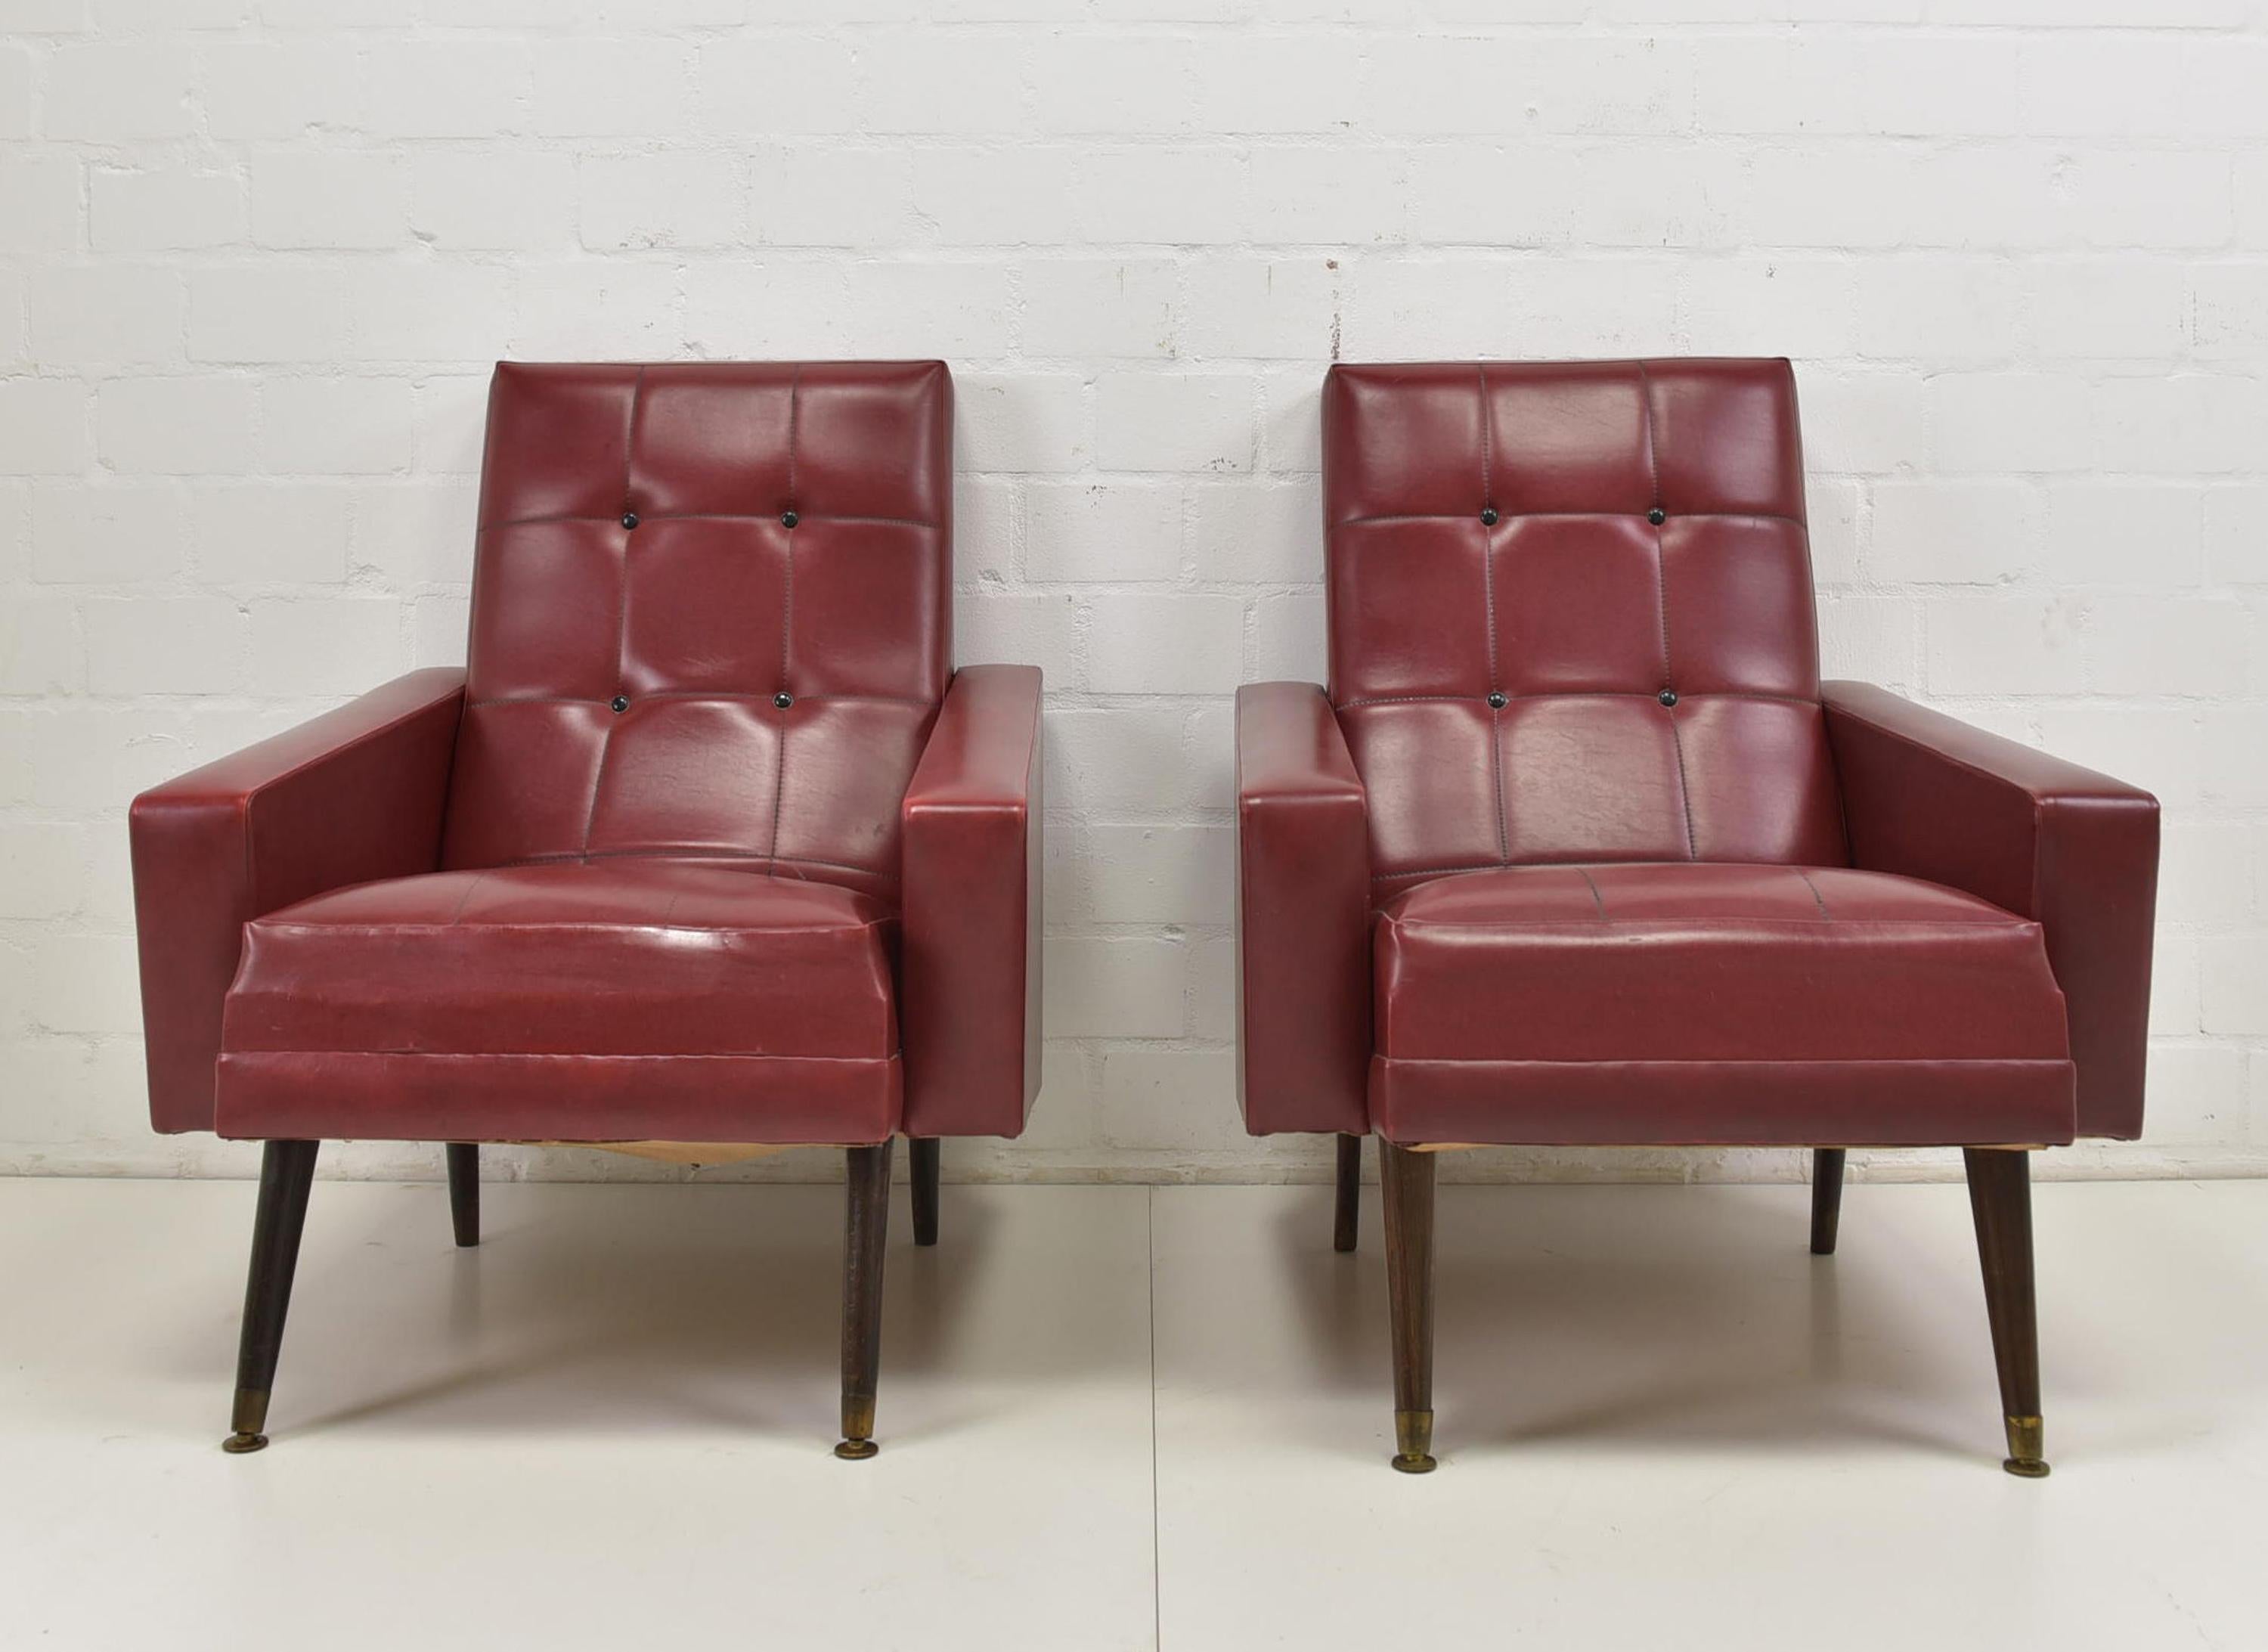 Pair of armchairs 2x Lounge Chair vintage 50s 60s red Skai Rockabilly club chairs

Features:
Black slanting legs with brass feet
Stylish and streamlined design
Good, ready-to-live-in condition
Stable and comfortable

Additional